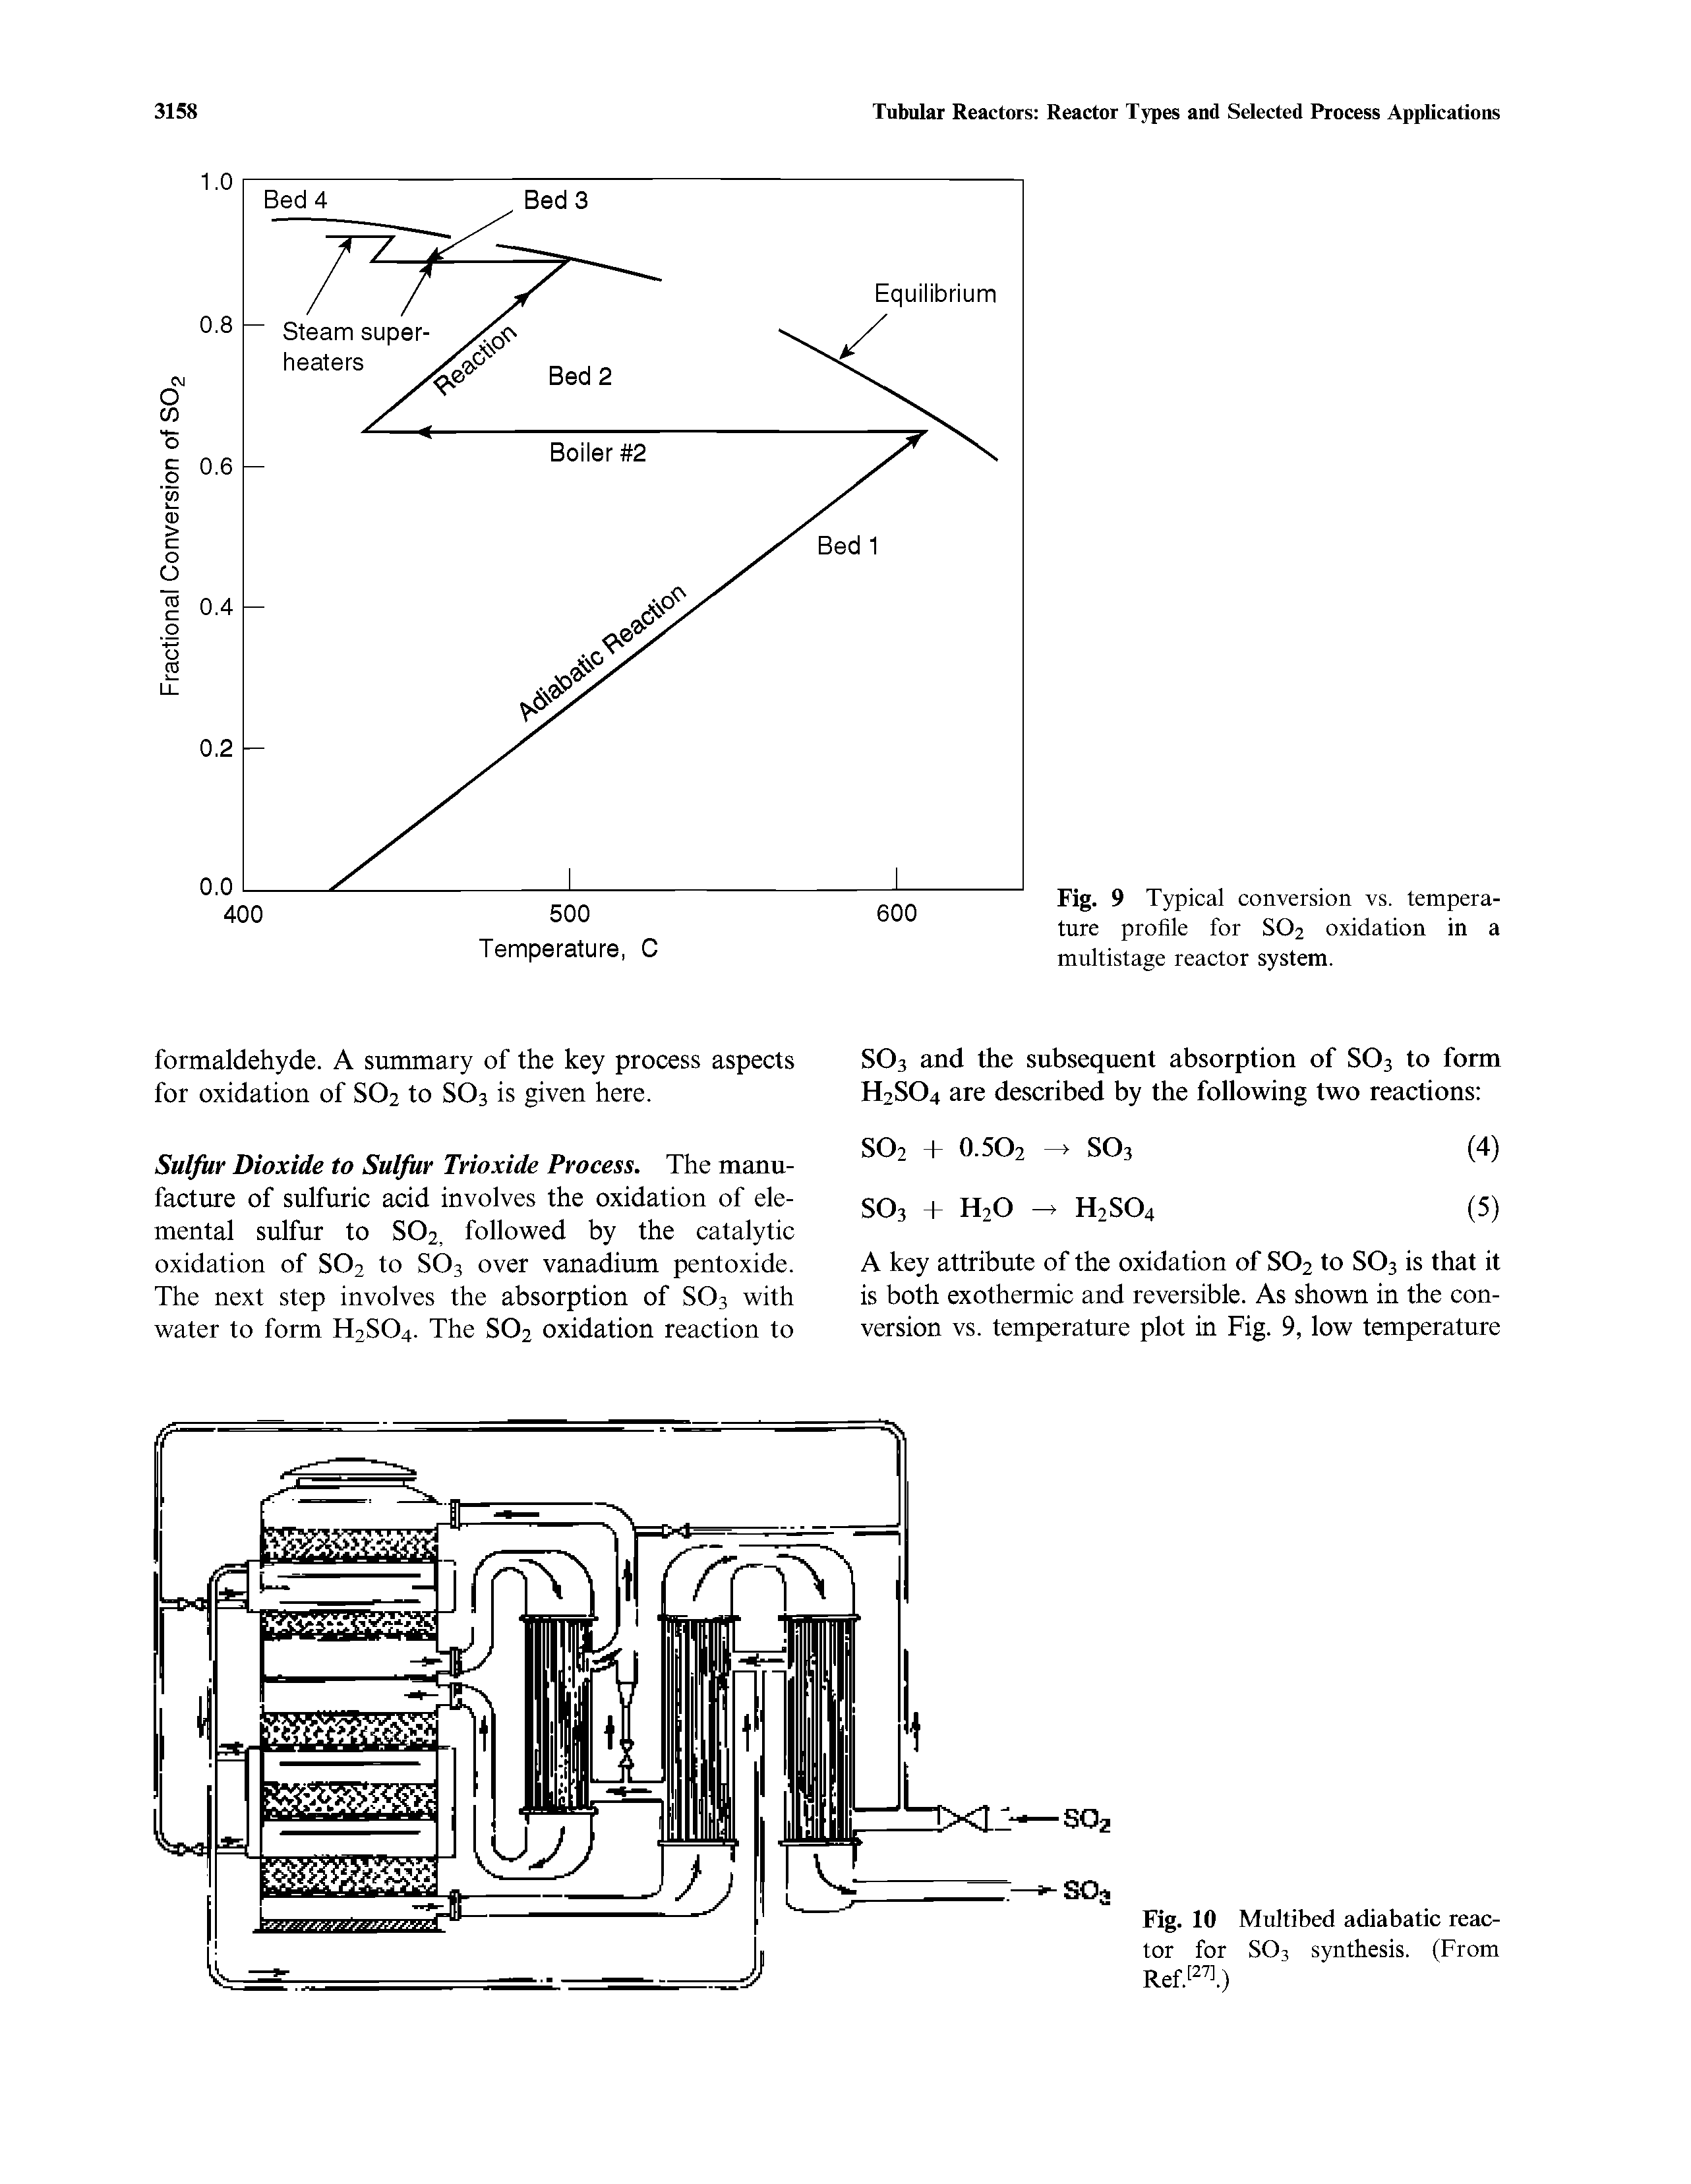 Fig. 9 Typical conversion vs. temperature profile for SO2 oxidation in a multistage reactor system.